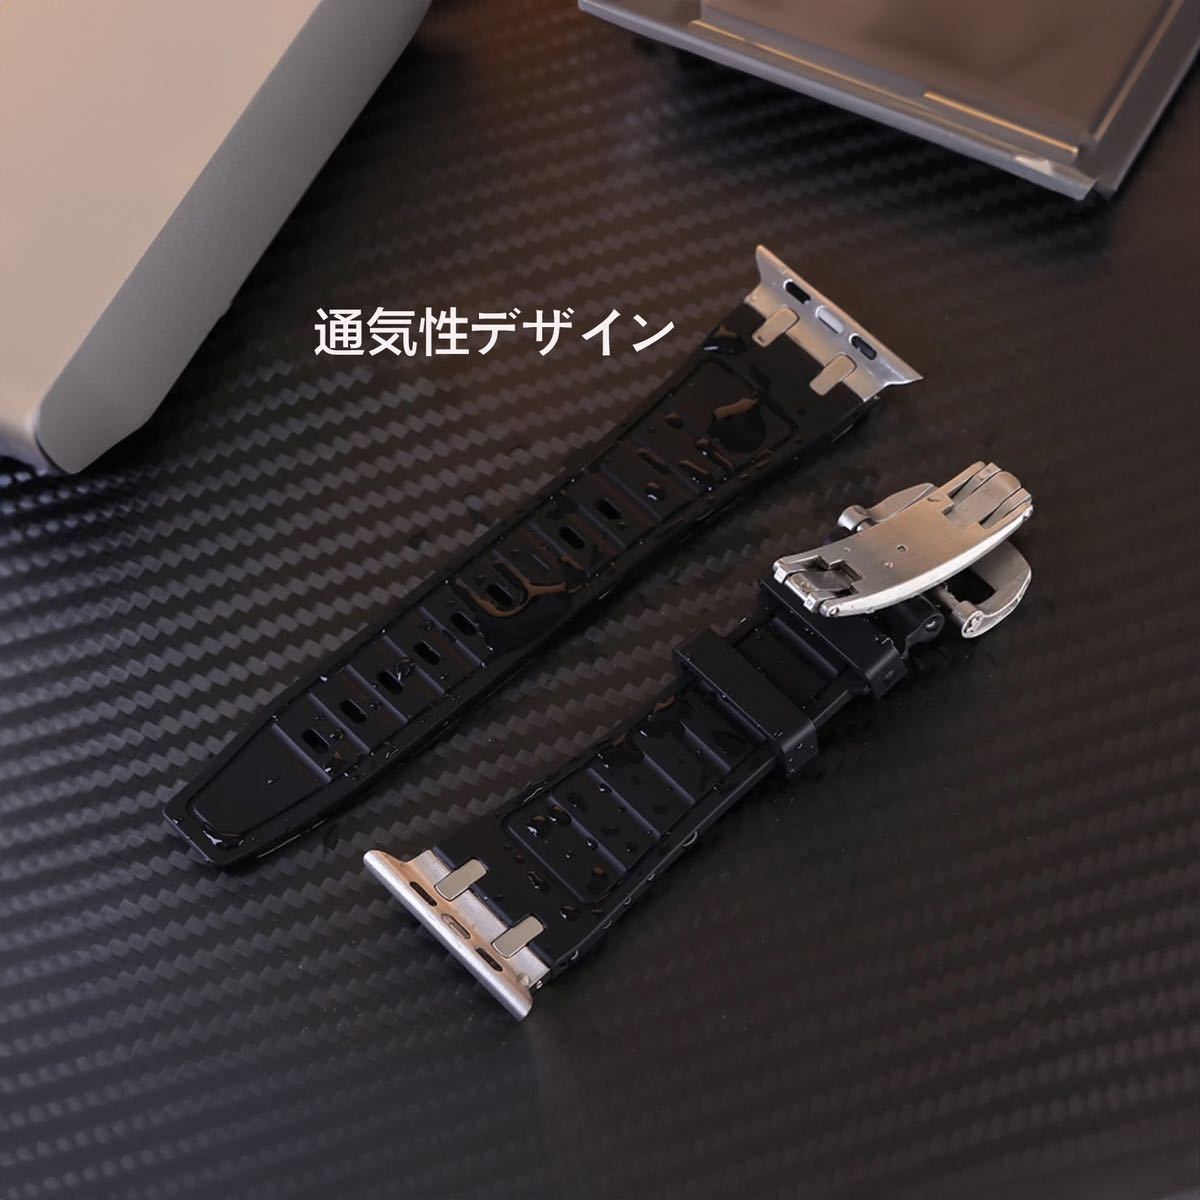 Apple watch Apple watch band belt si Ricoh n high quality 316L stainless steel 